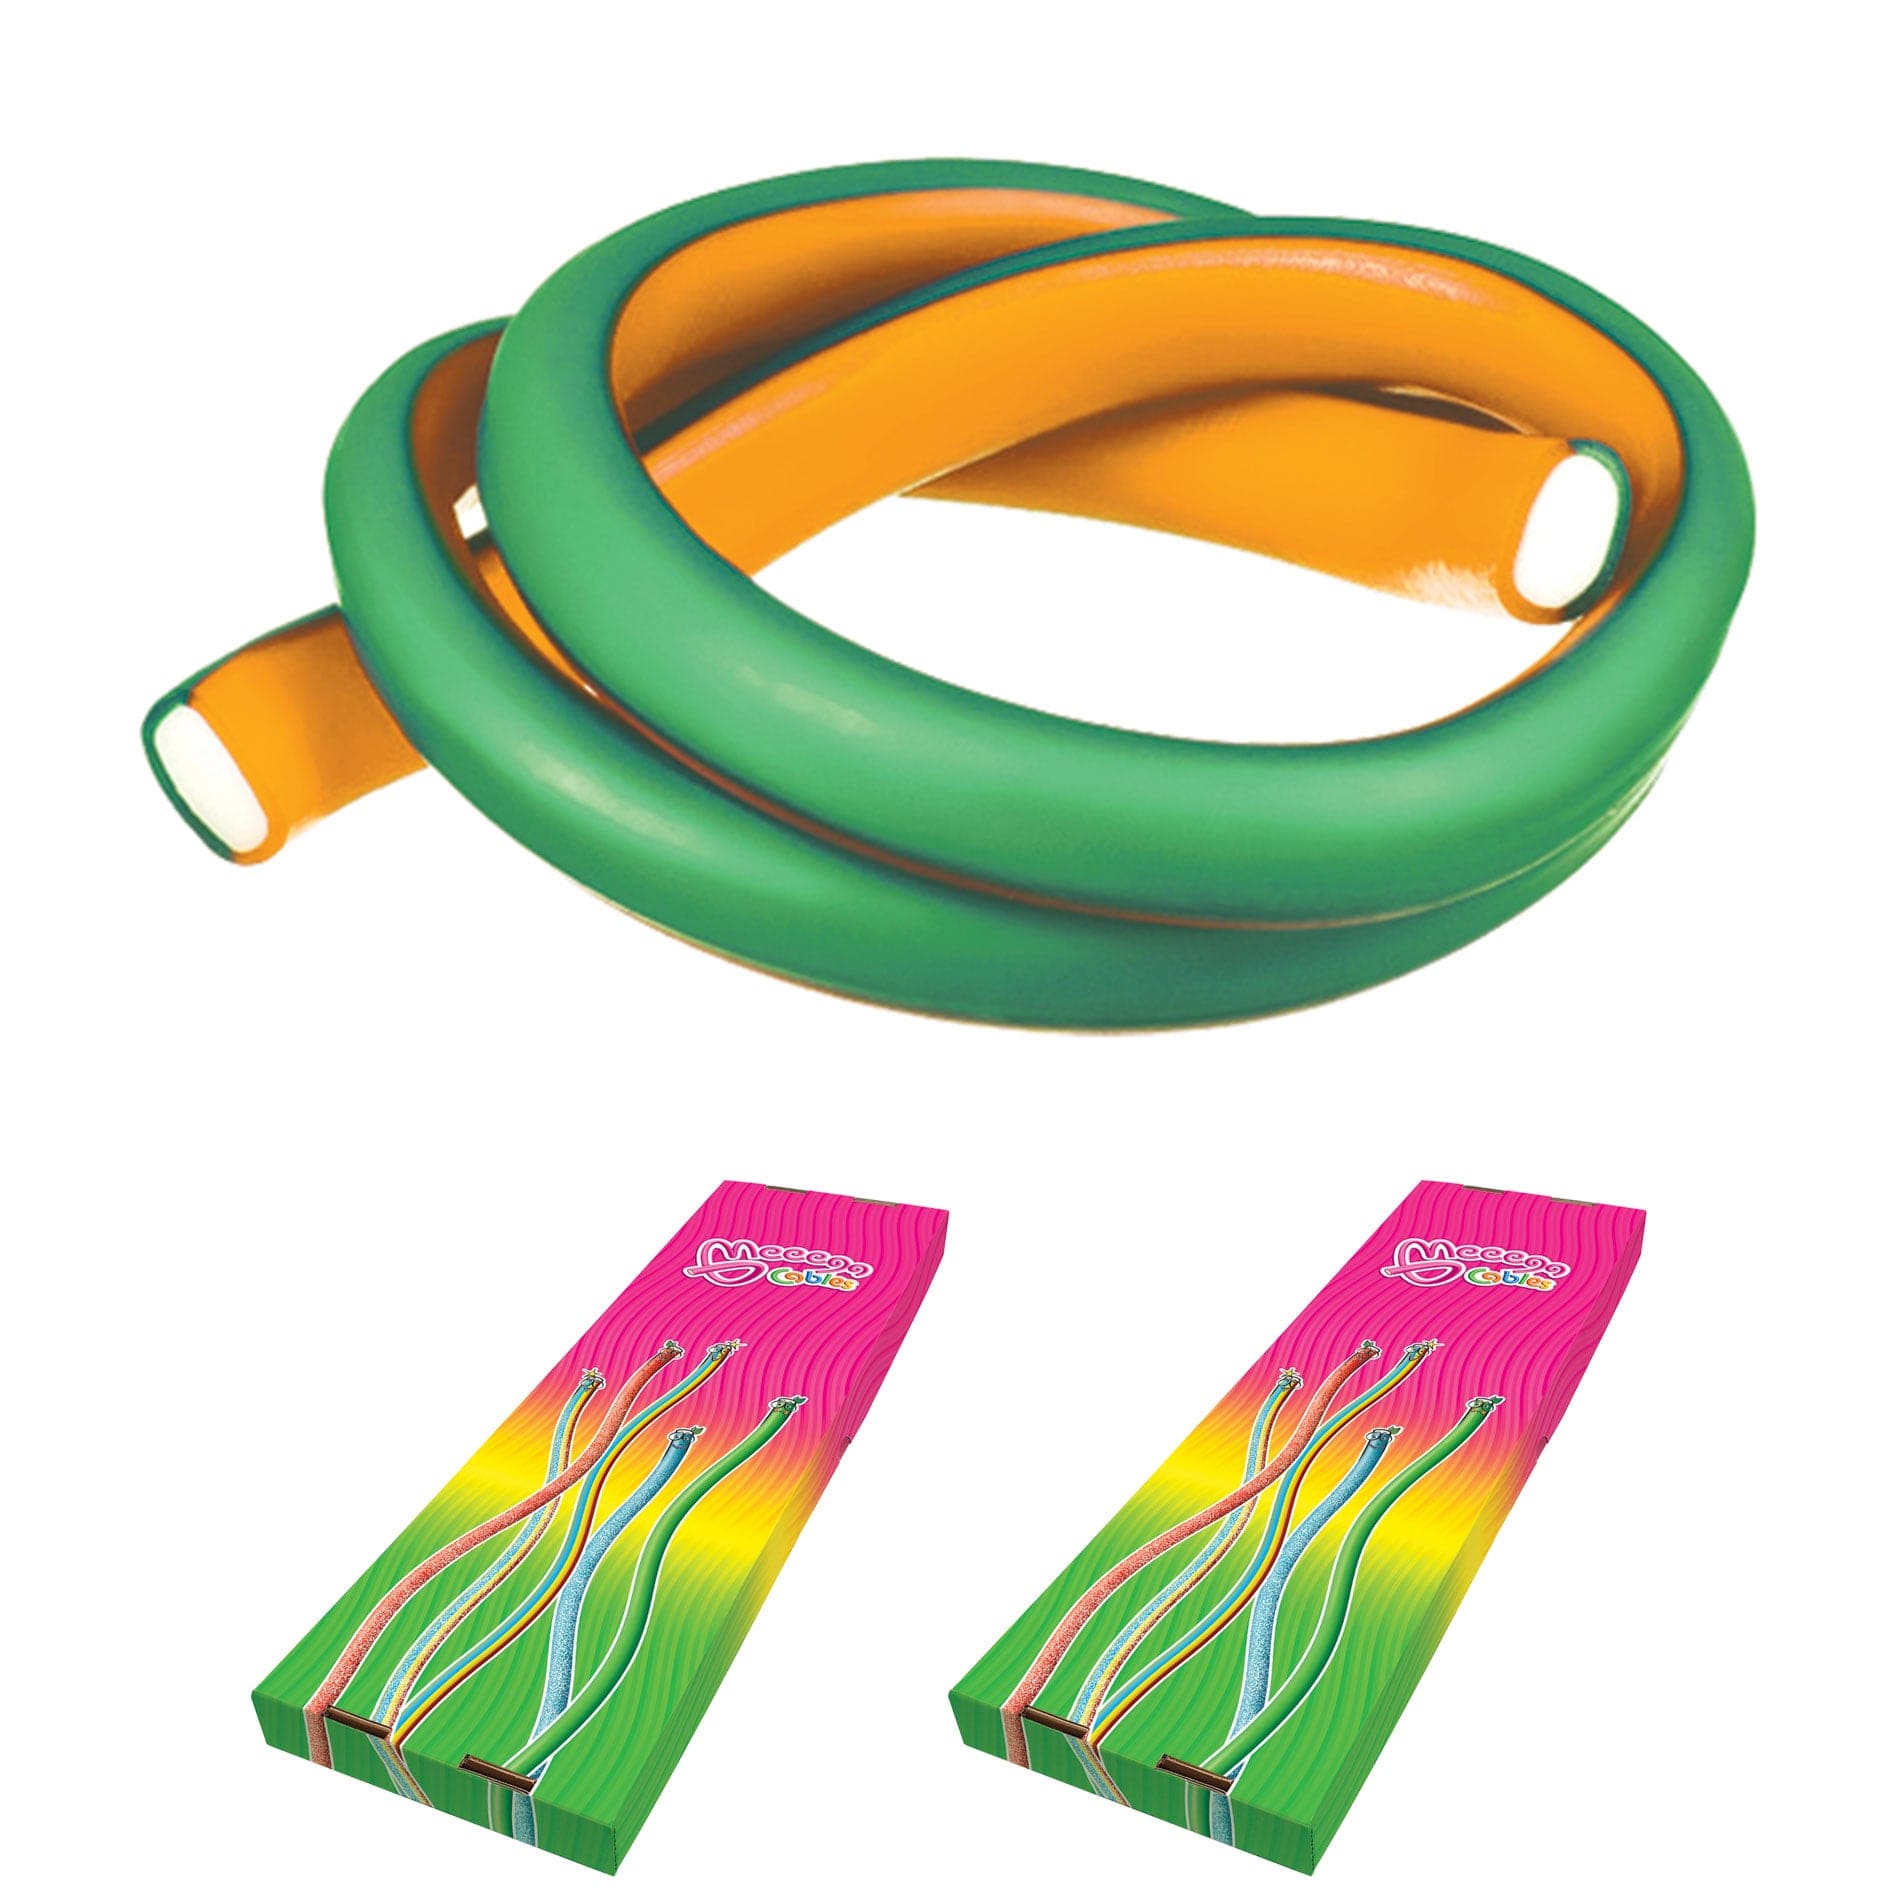 Novelty Concessions Gummy Rope ORANGE LIME / 2 Pack (60 pieces) Meeega Cables European Chewy Rope Candy - Box of 30 individually wrapped Meeega Cables, each over 2-feet long cups with lids and straws